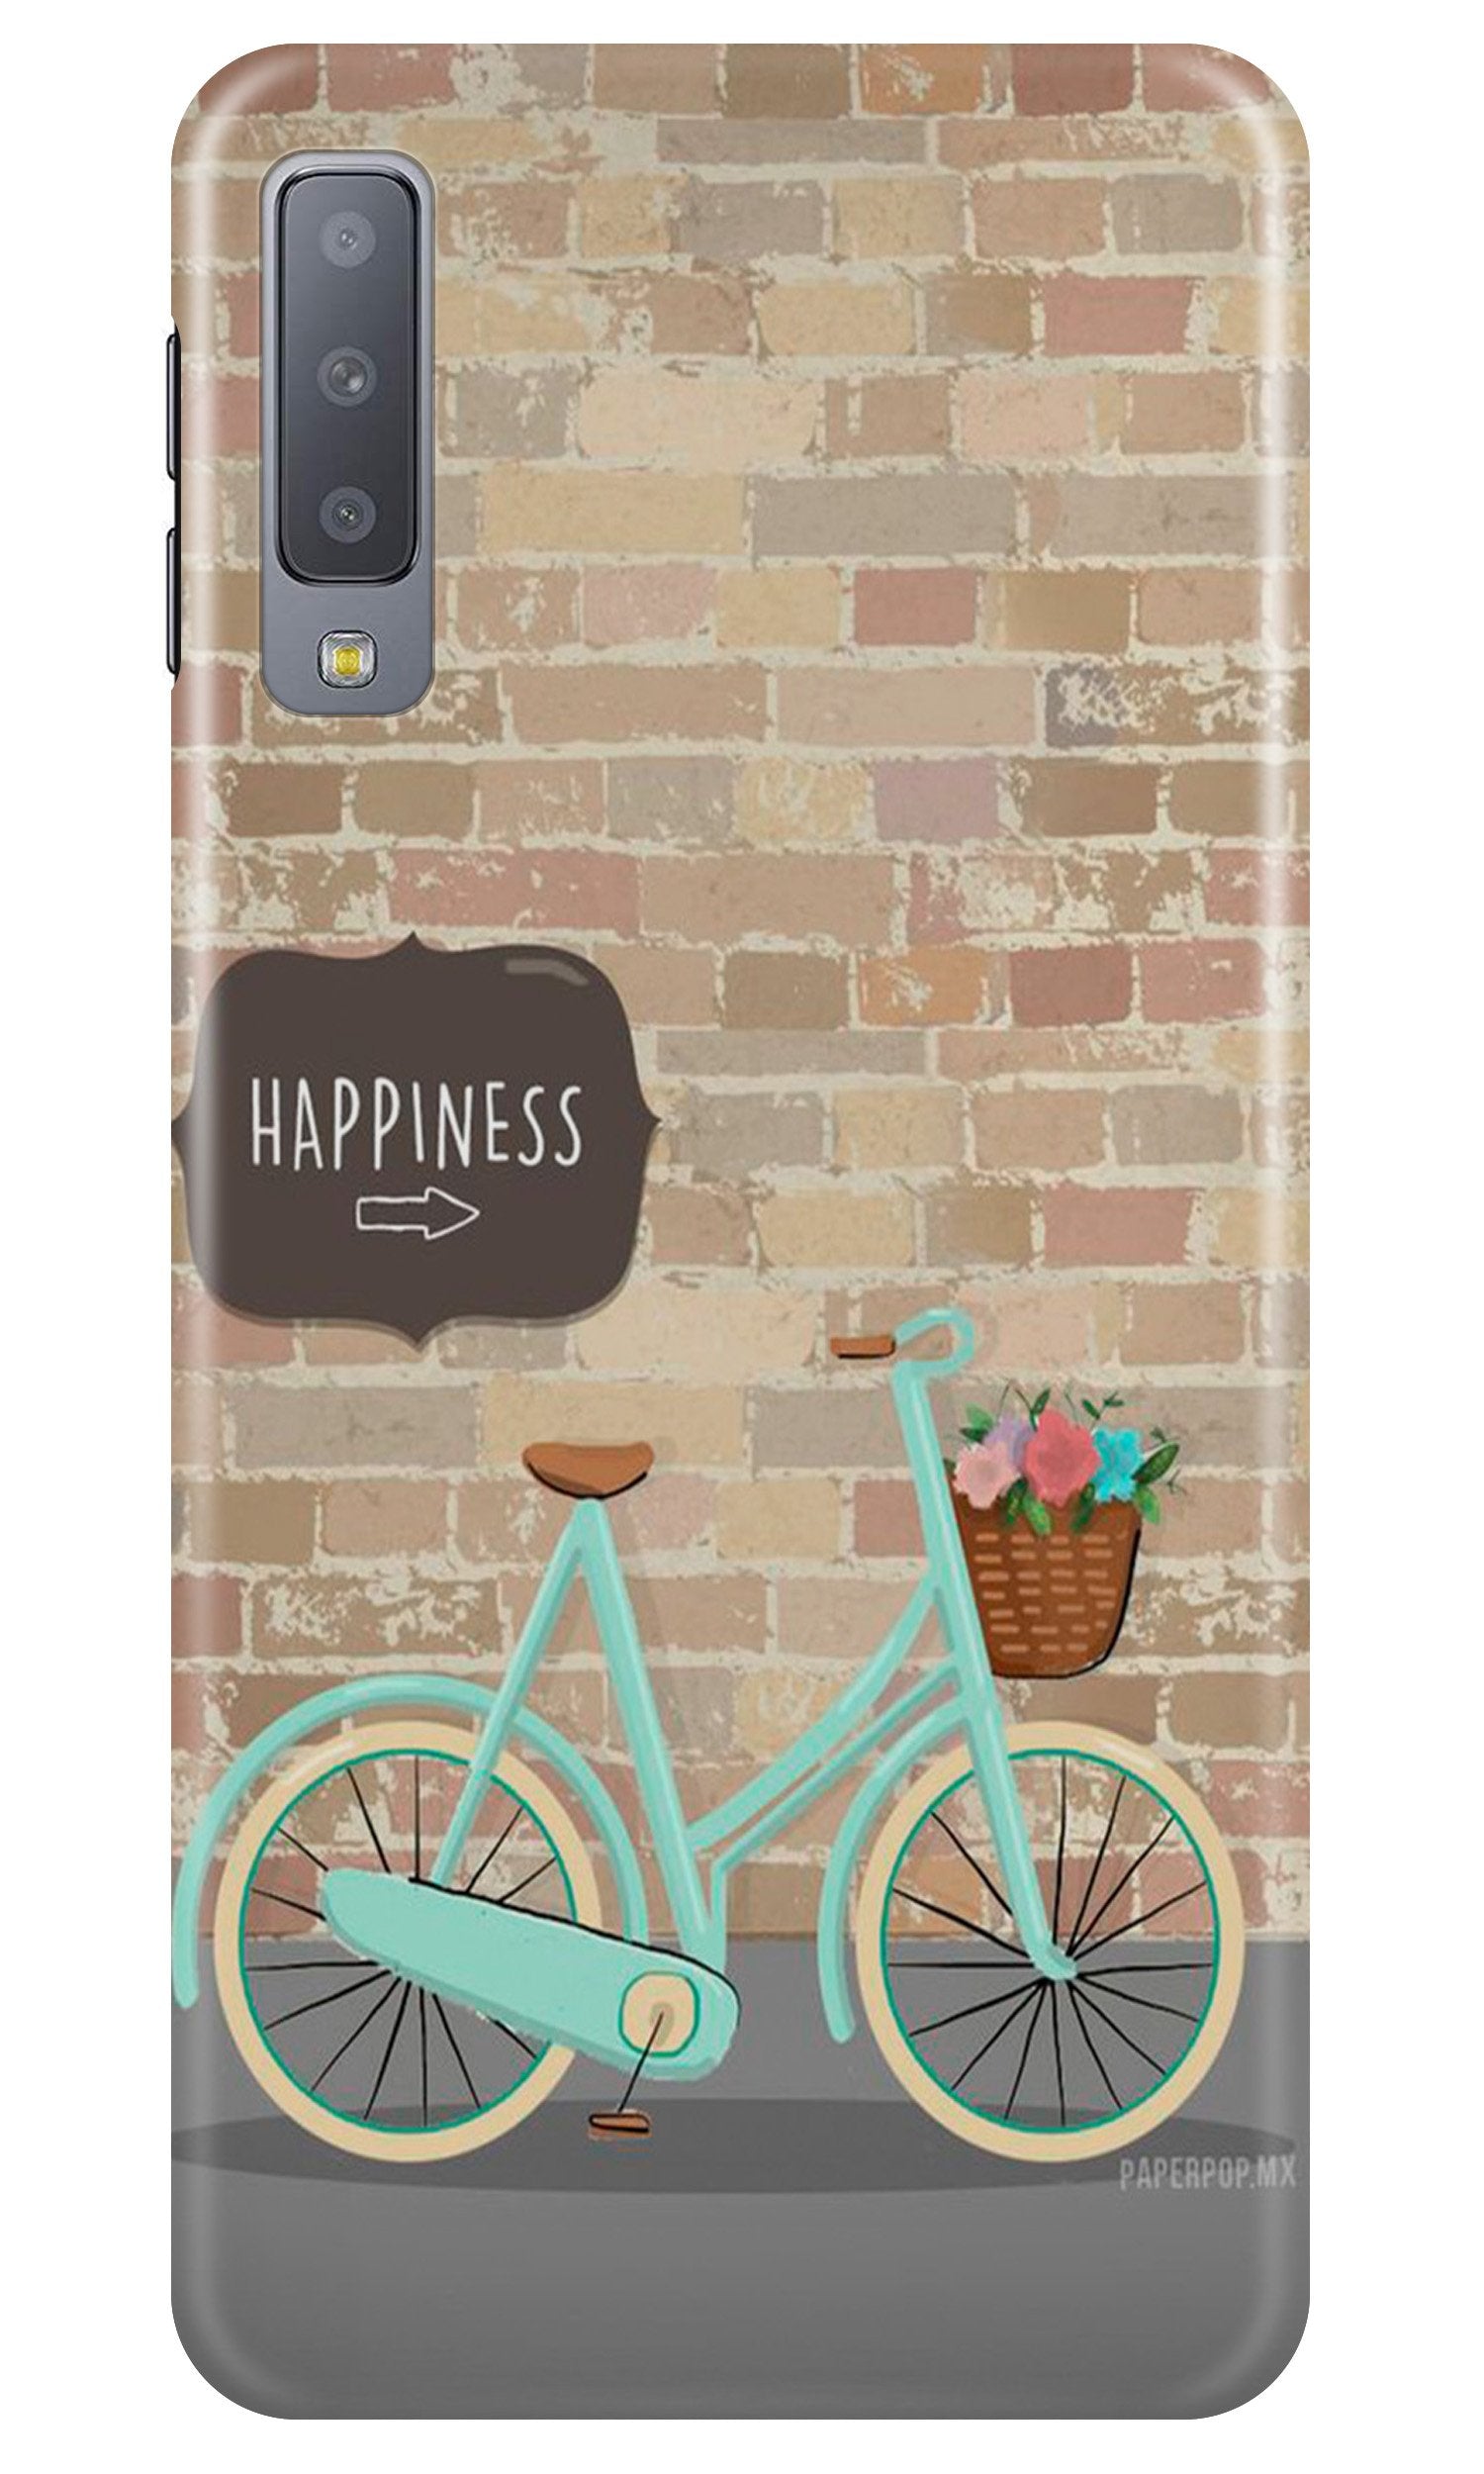 Happiness Case for Samung Galaxy A70s